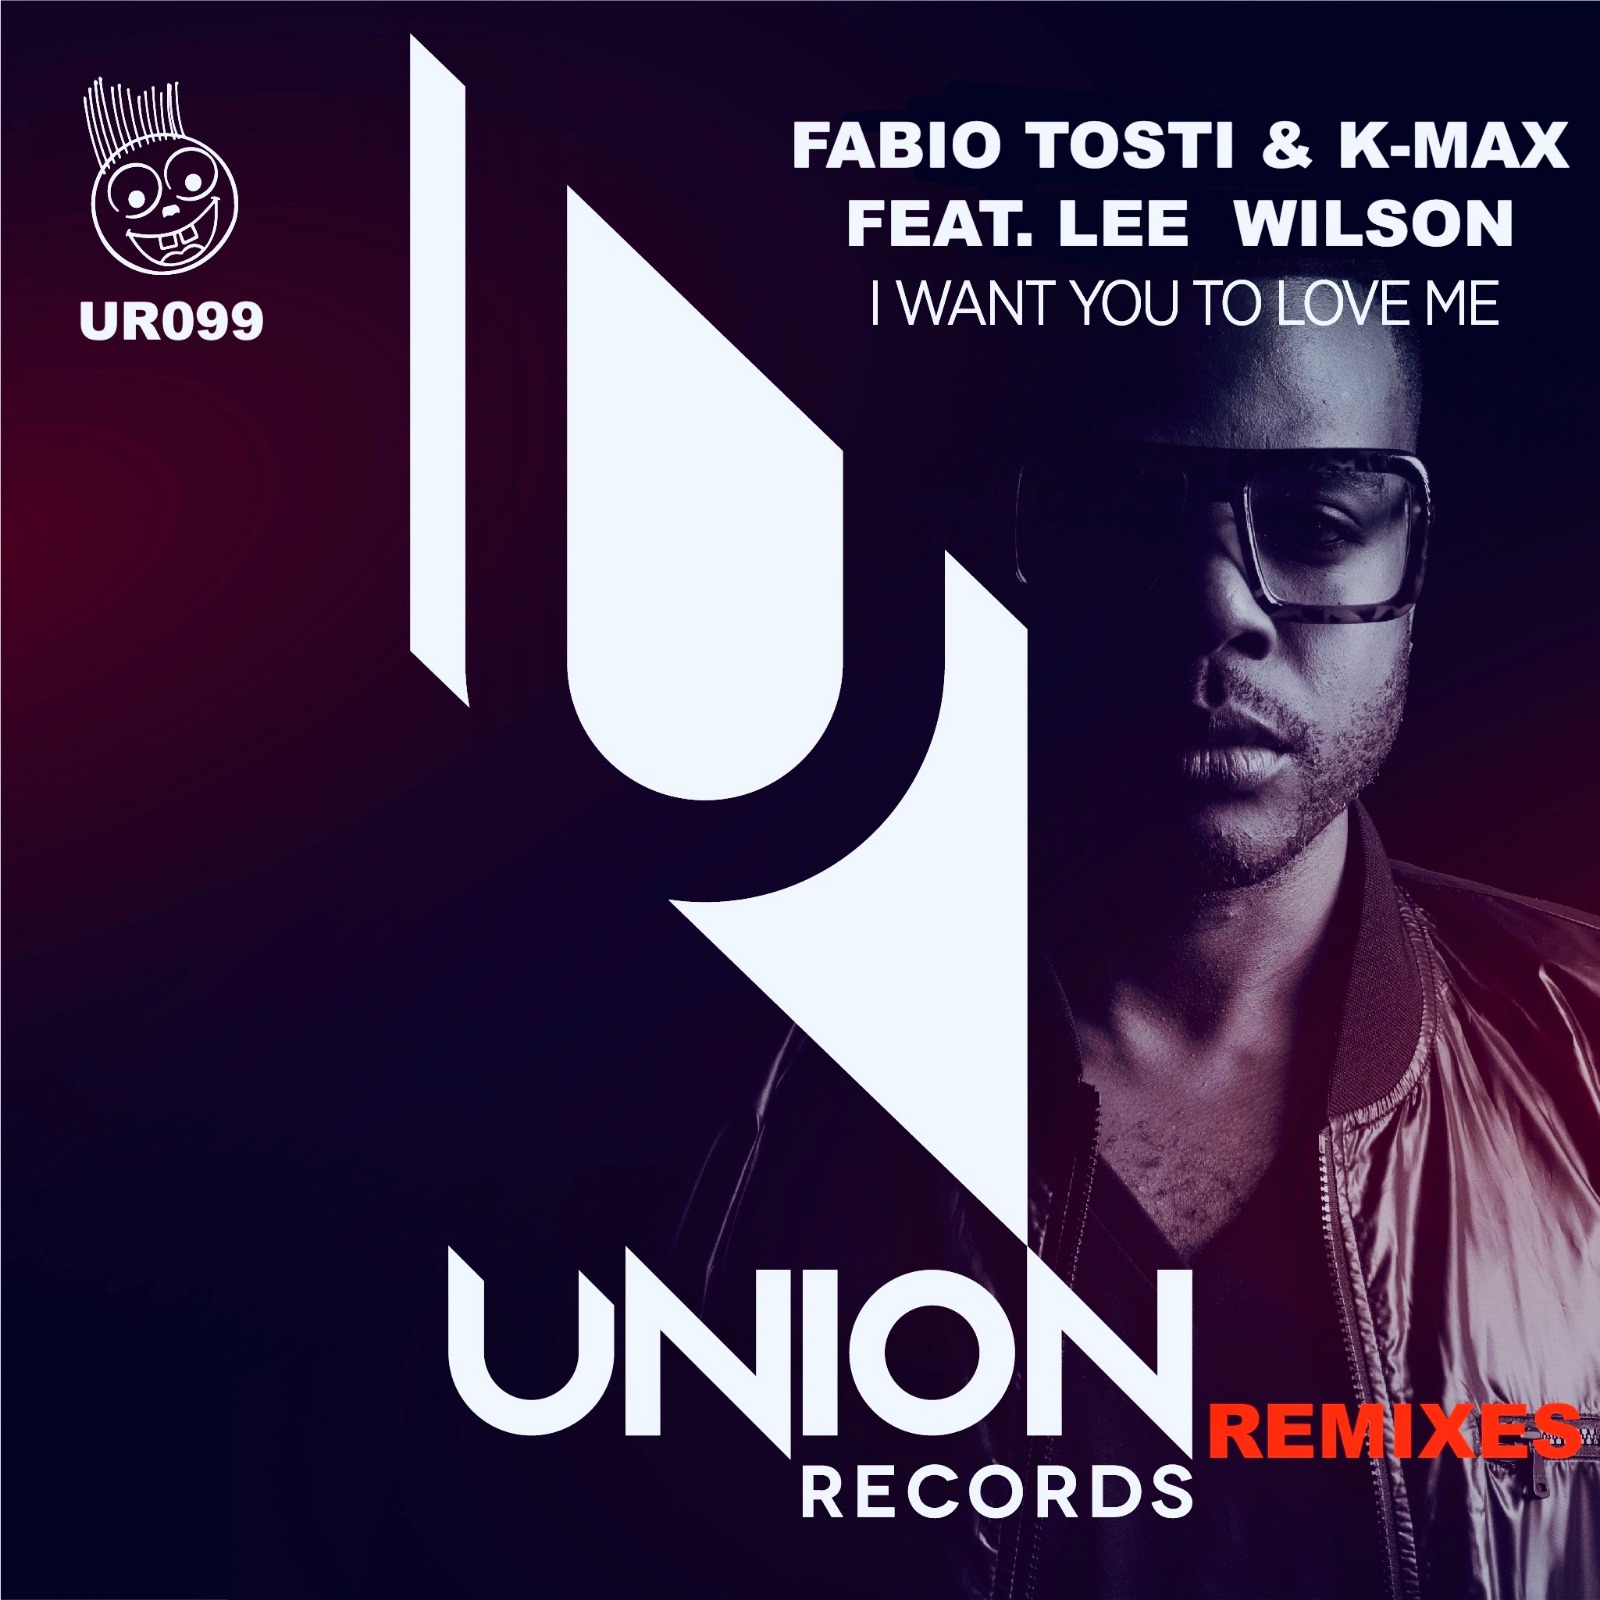 fabio-tosti-k-max-feat-lee-wilson-i-want-you-to-love-me-remixes